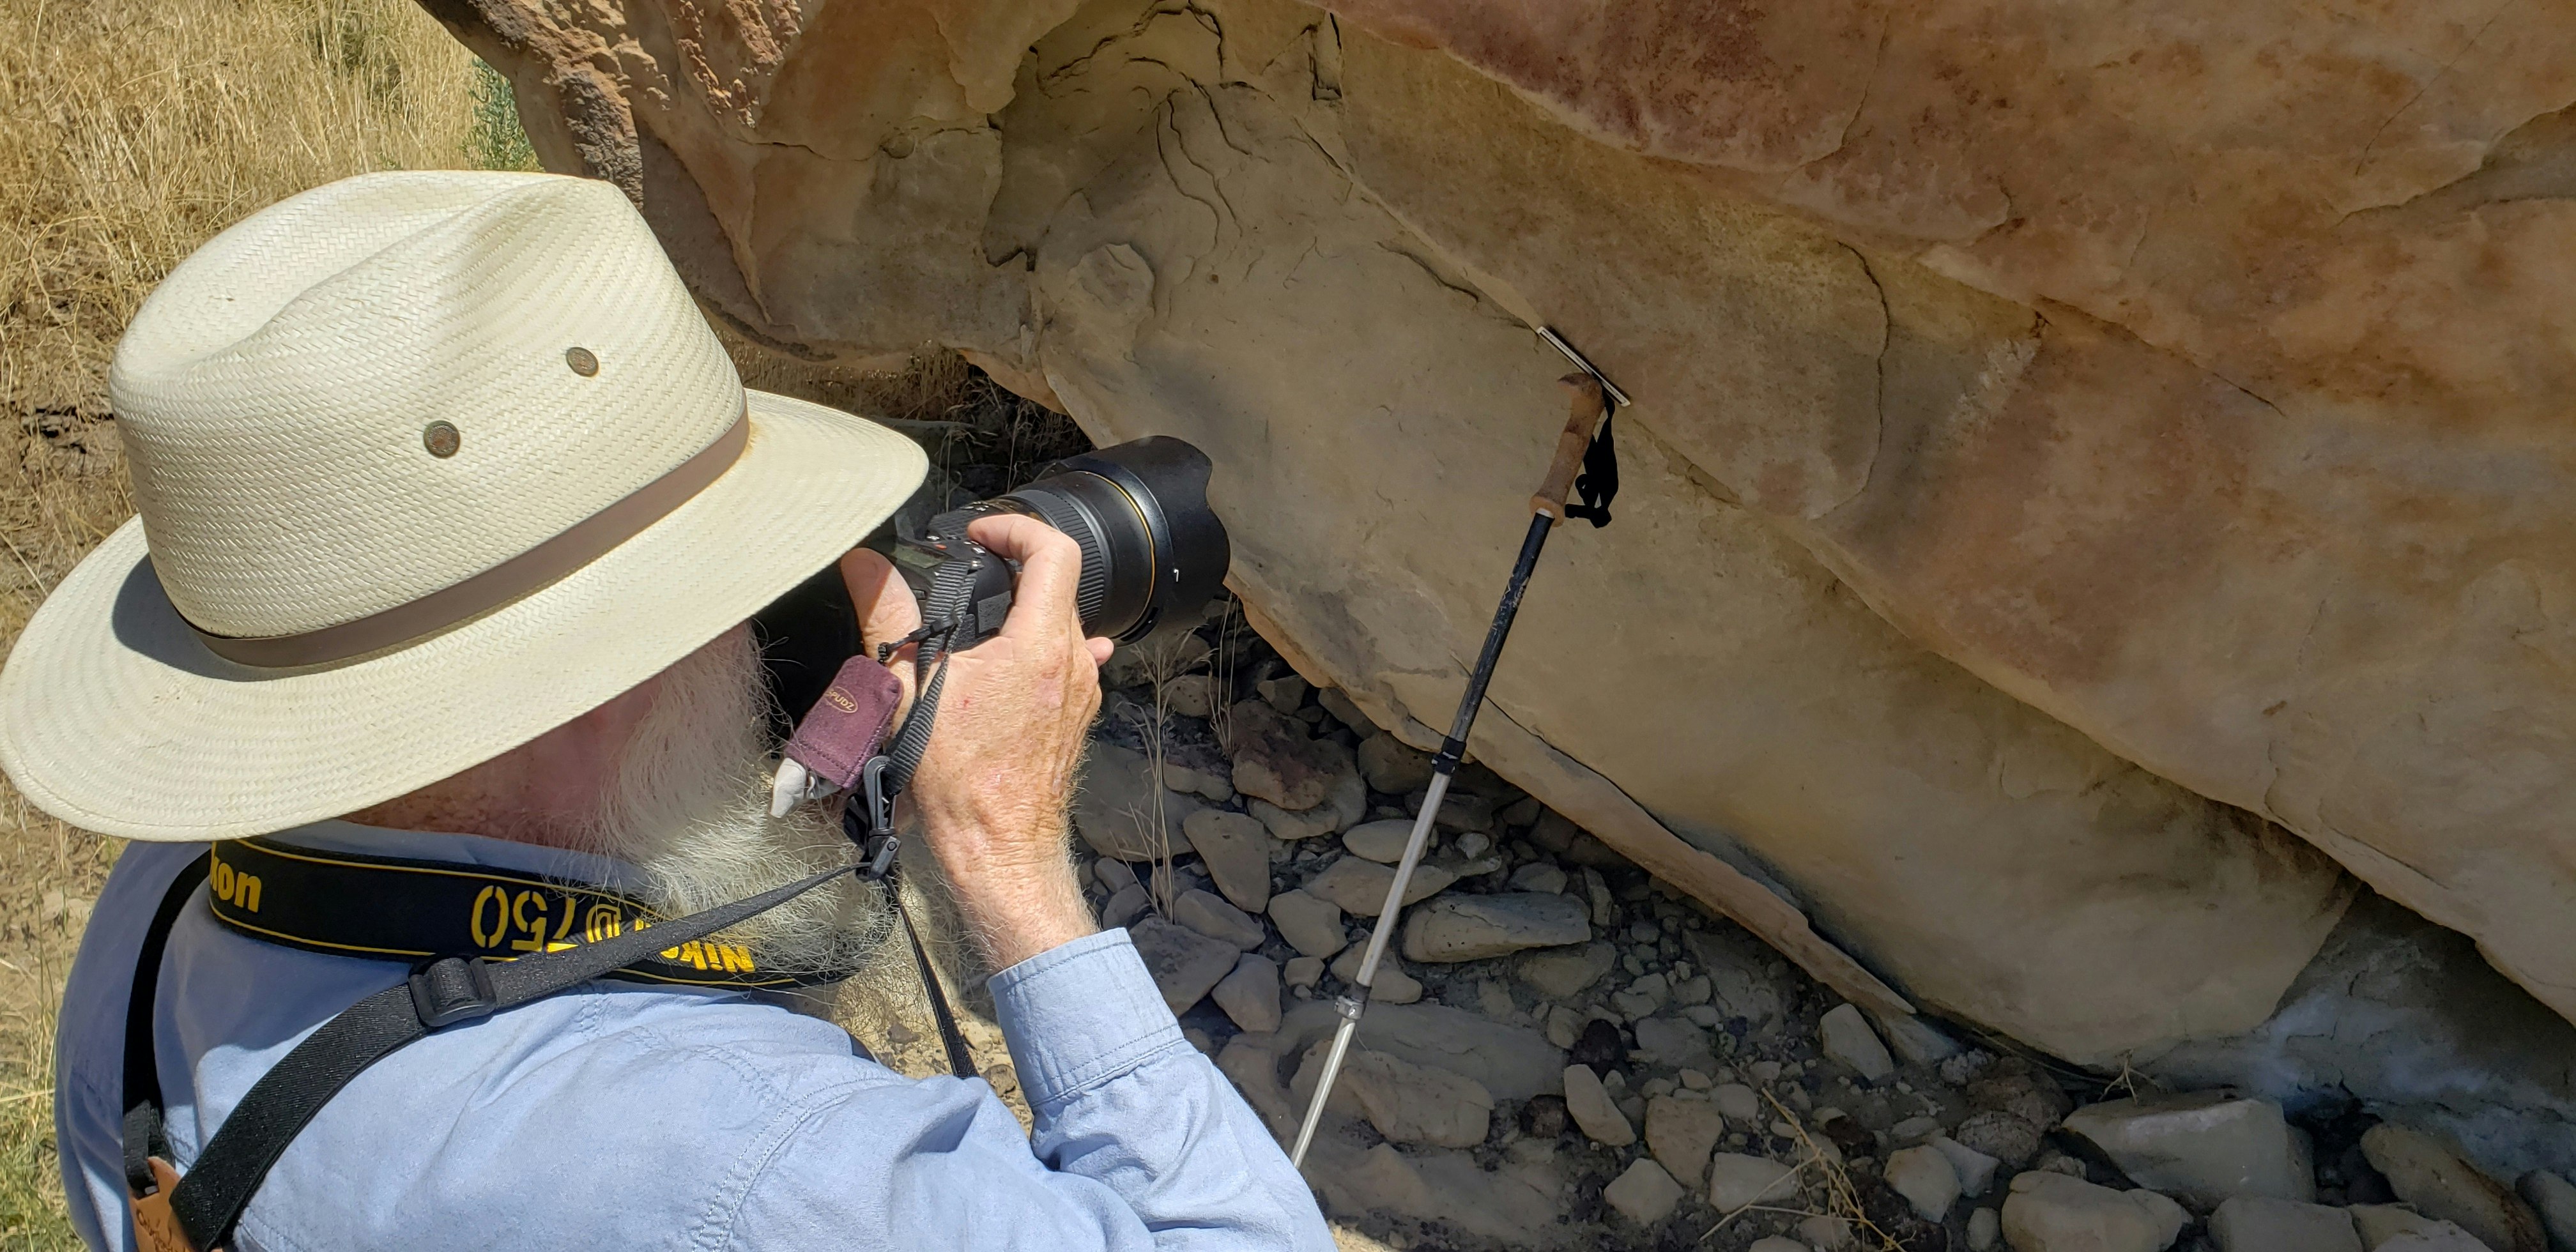 Mike Bies takes photos of a new petroglyph found on the Wind River Indian Reservation The slip of paper held up by the walking stick has measurements on it which will help later with dimensions of the petroglyphs.